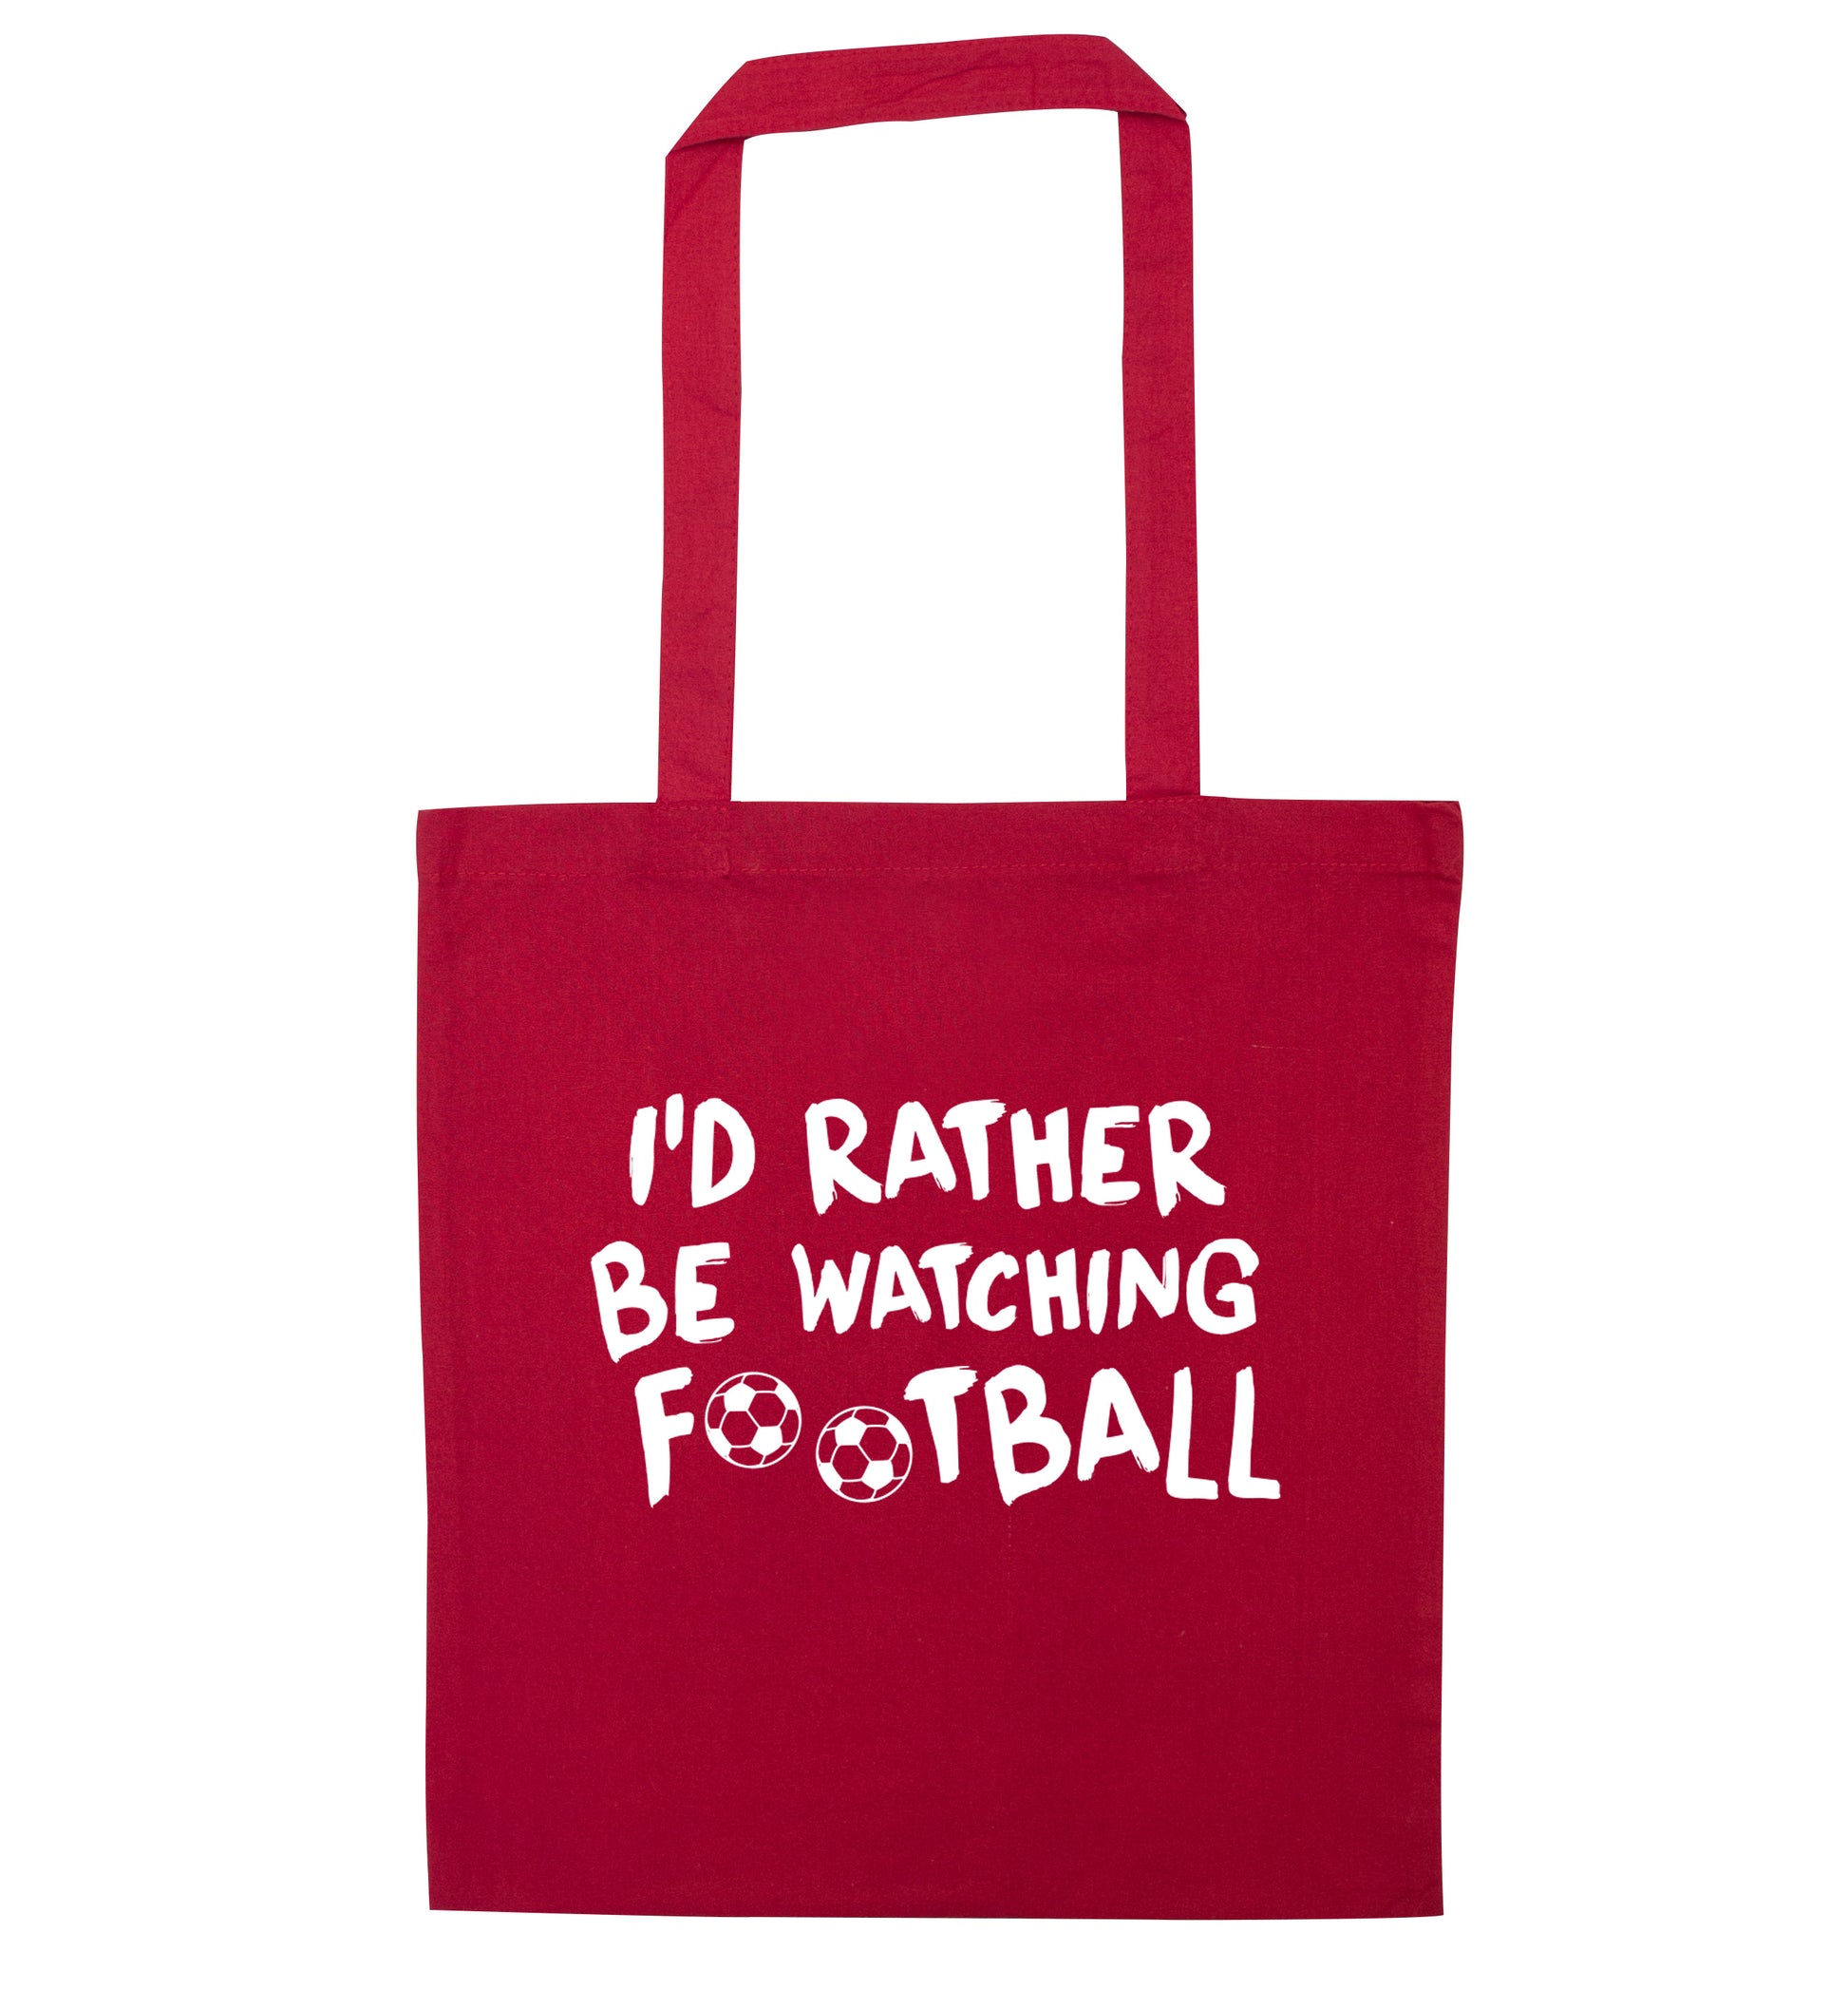 I'd rather be watching football red tote bag